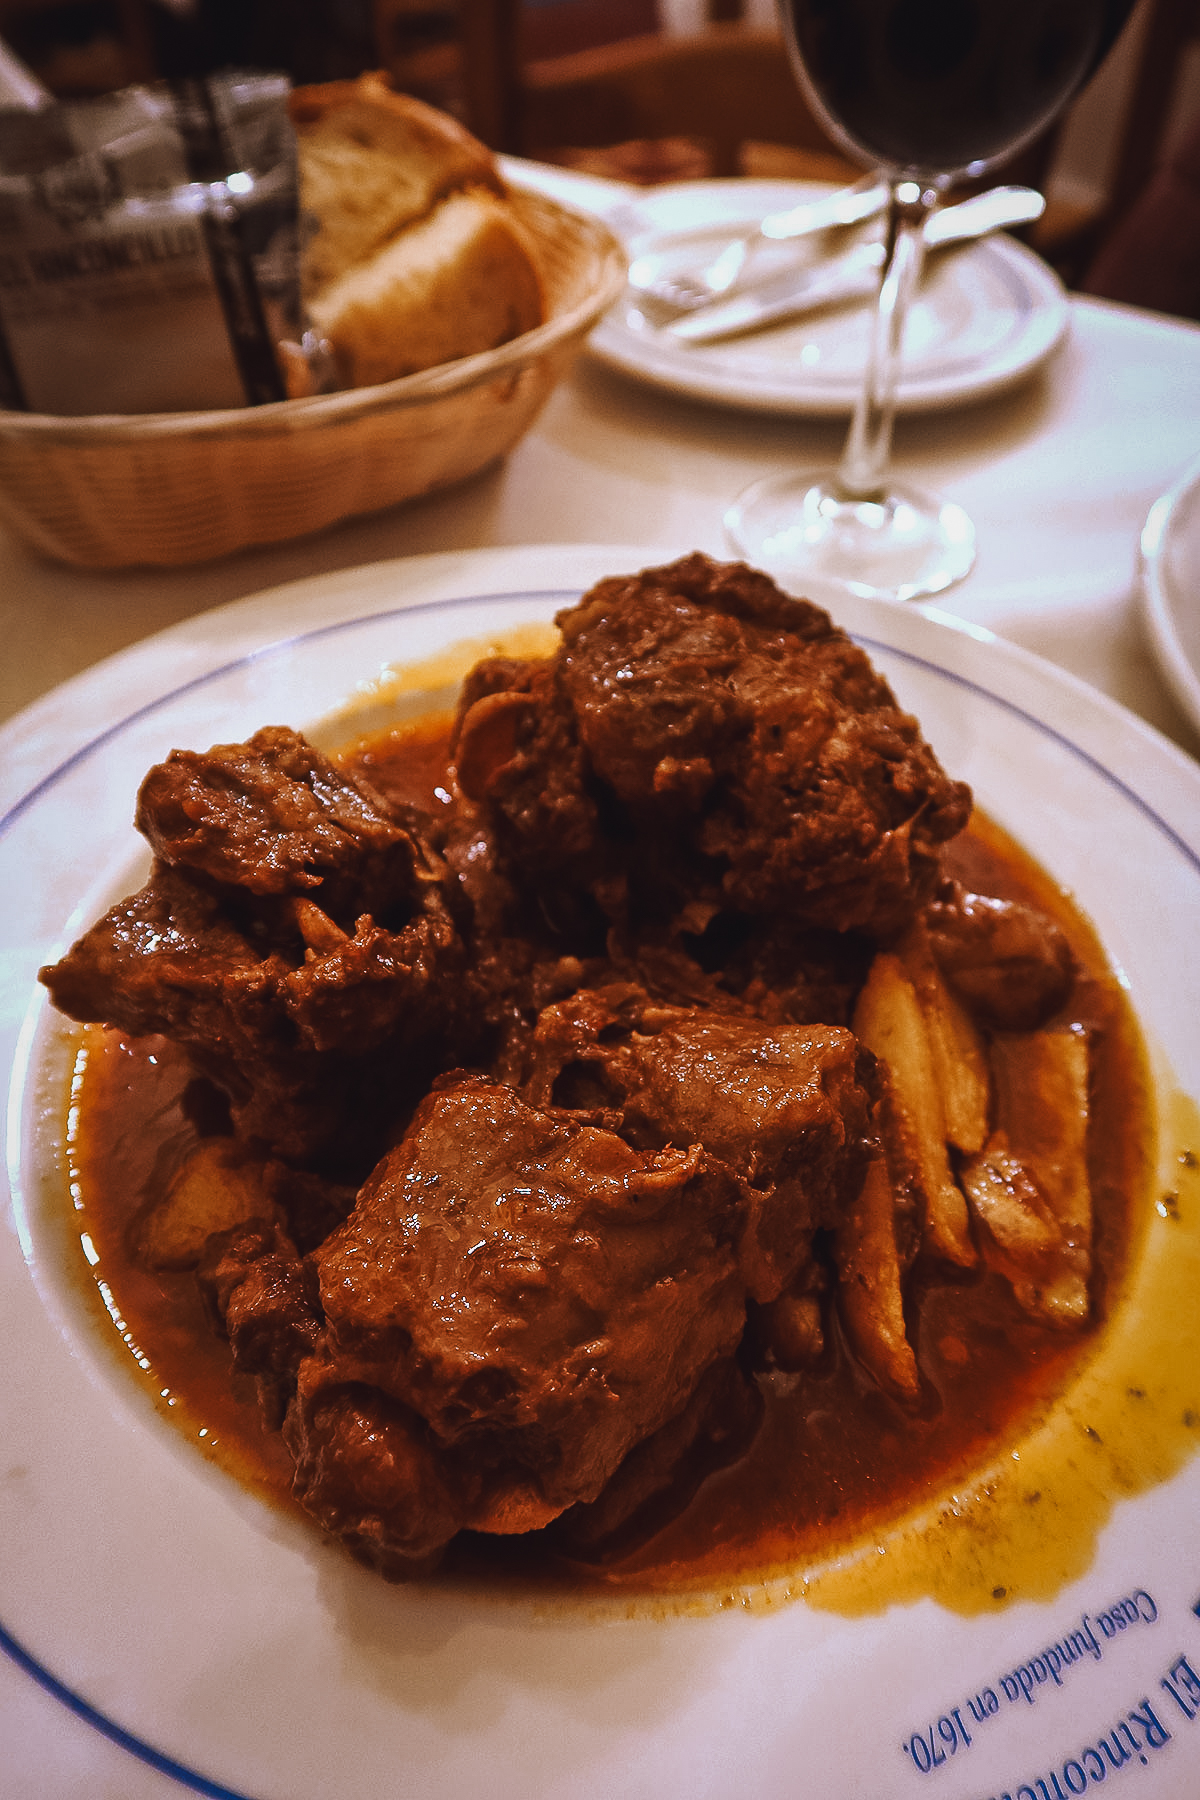 Ox tail at a restaurant in Seville